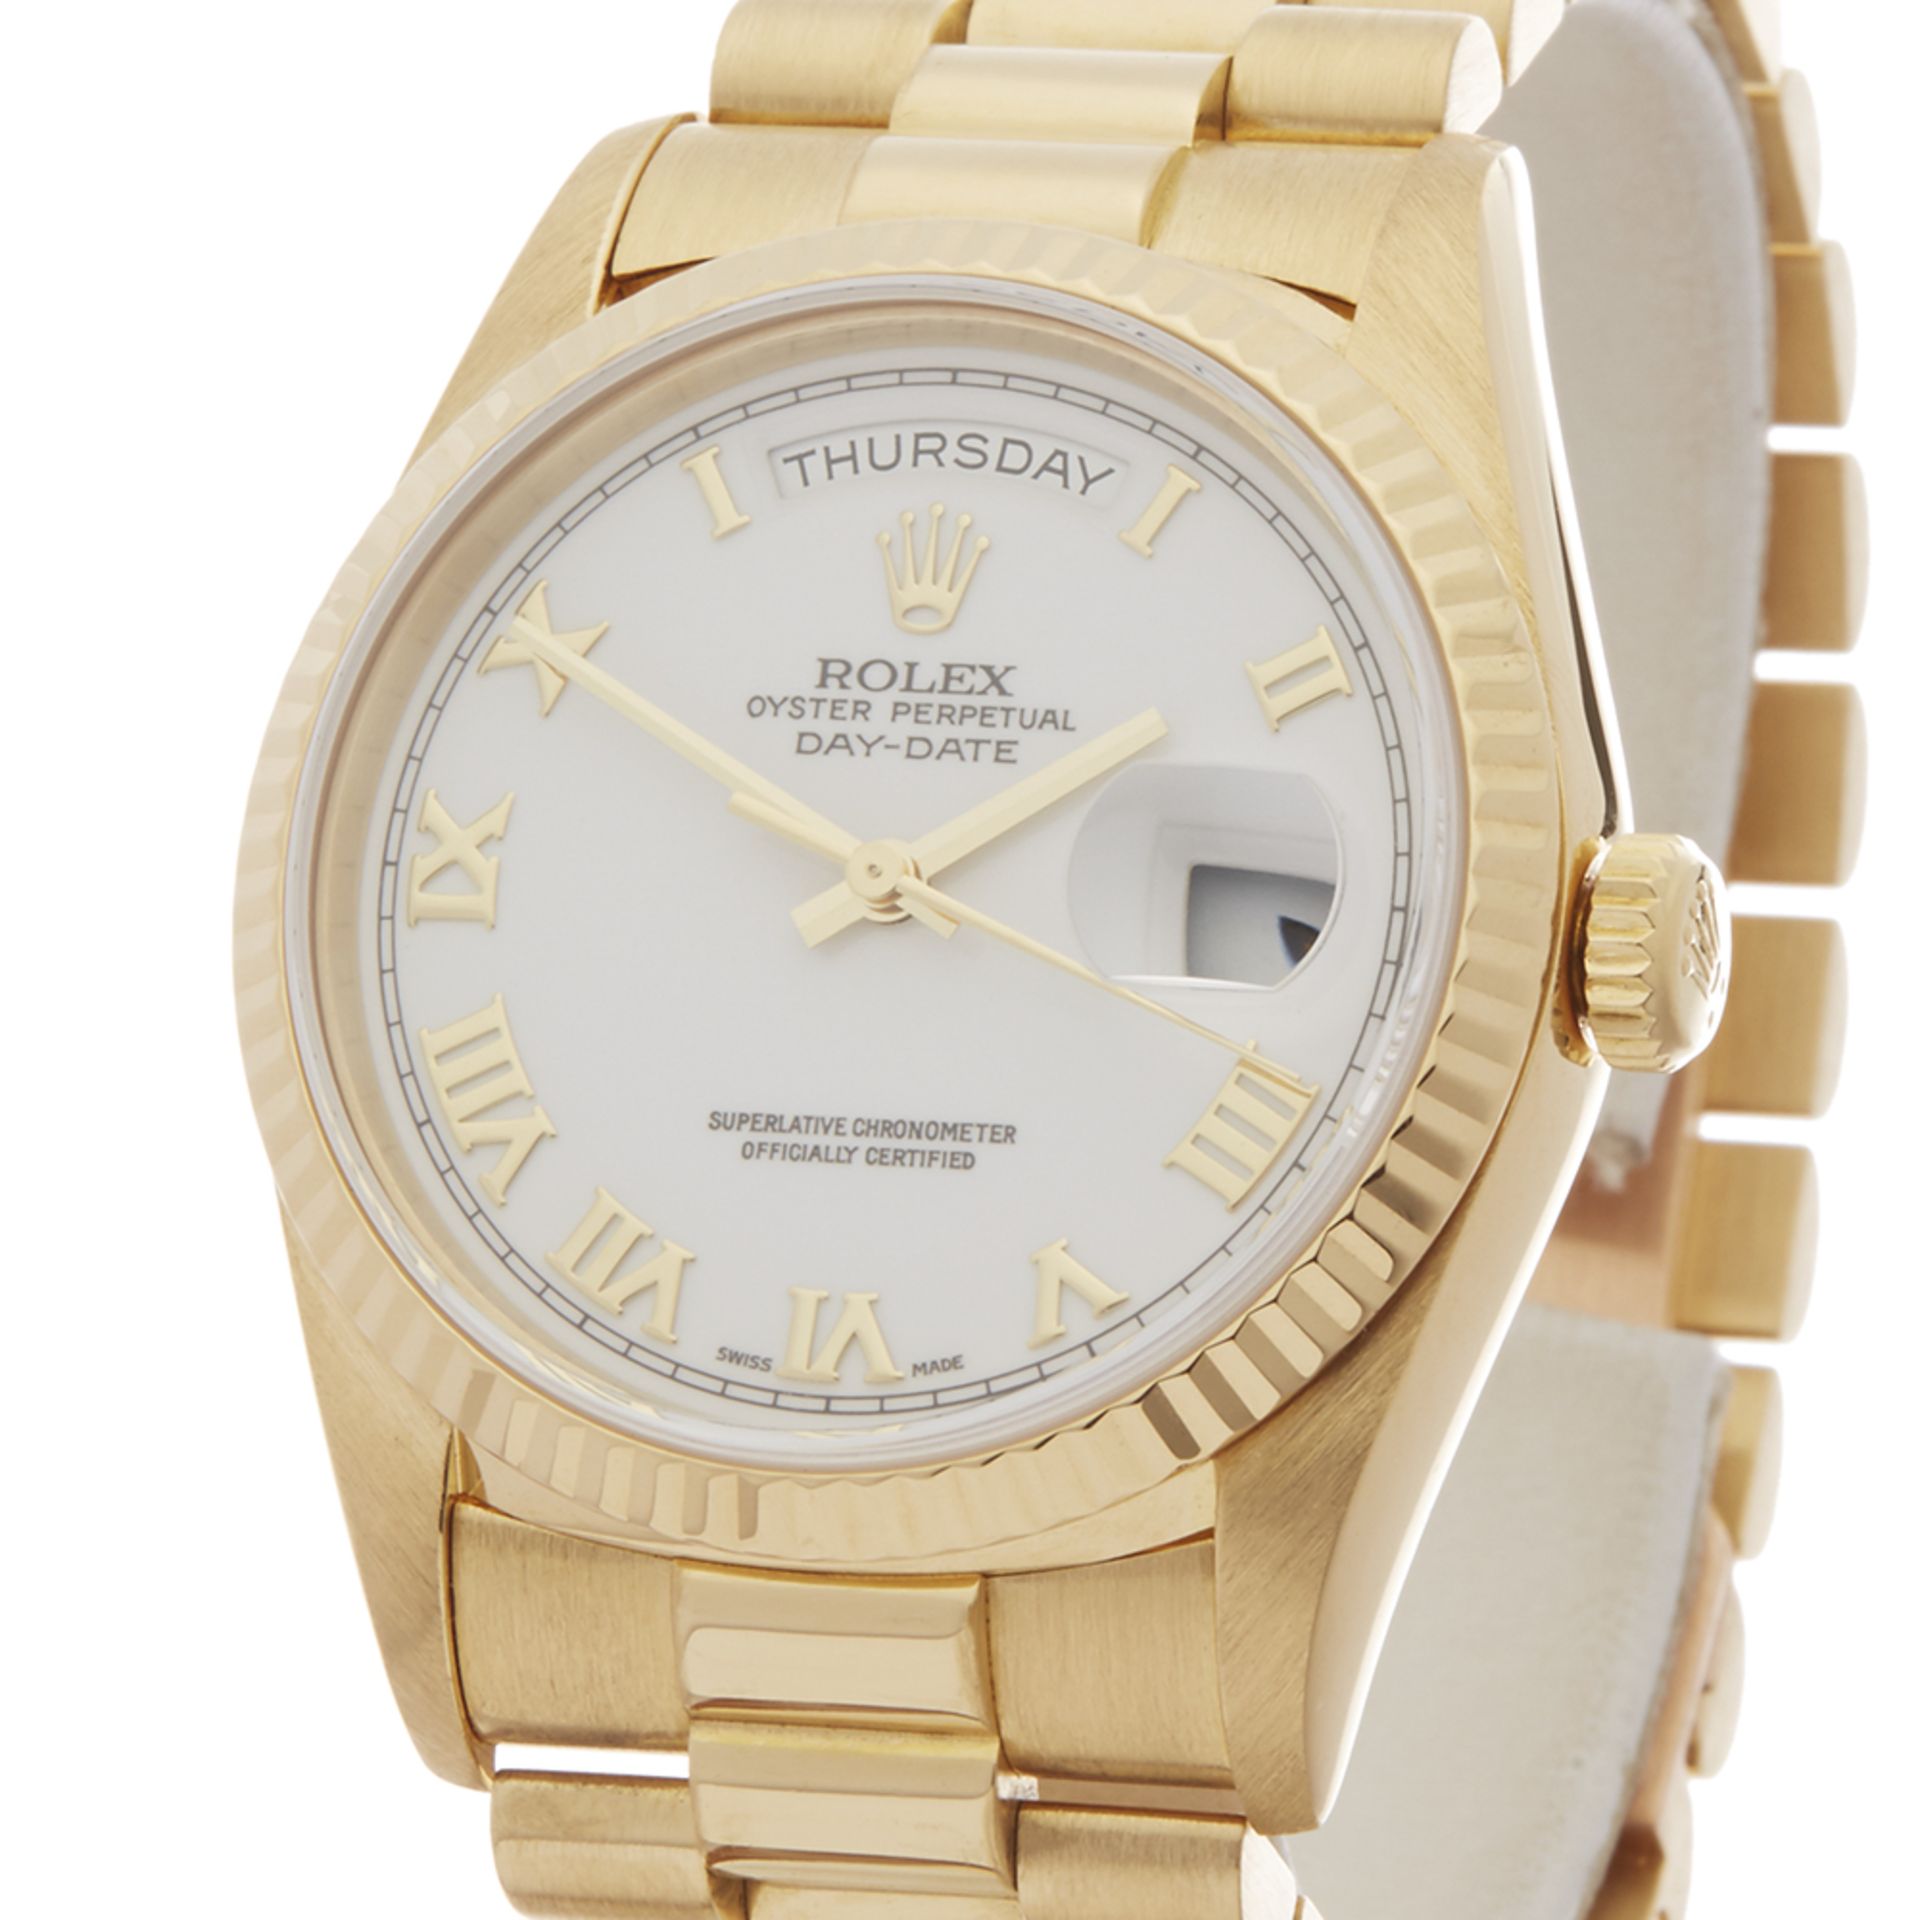 1991 Rolex Day-Date 36 18k Yellow Gold - 18238 - Image 5 of 6